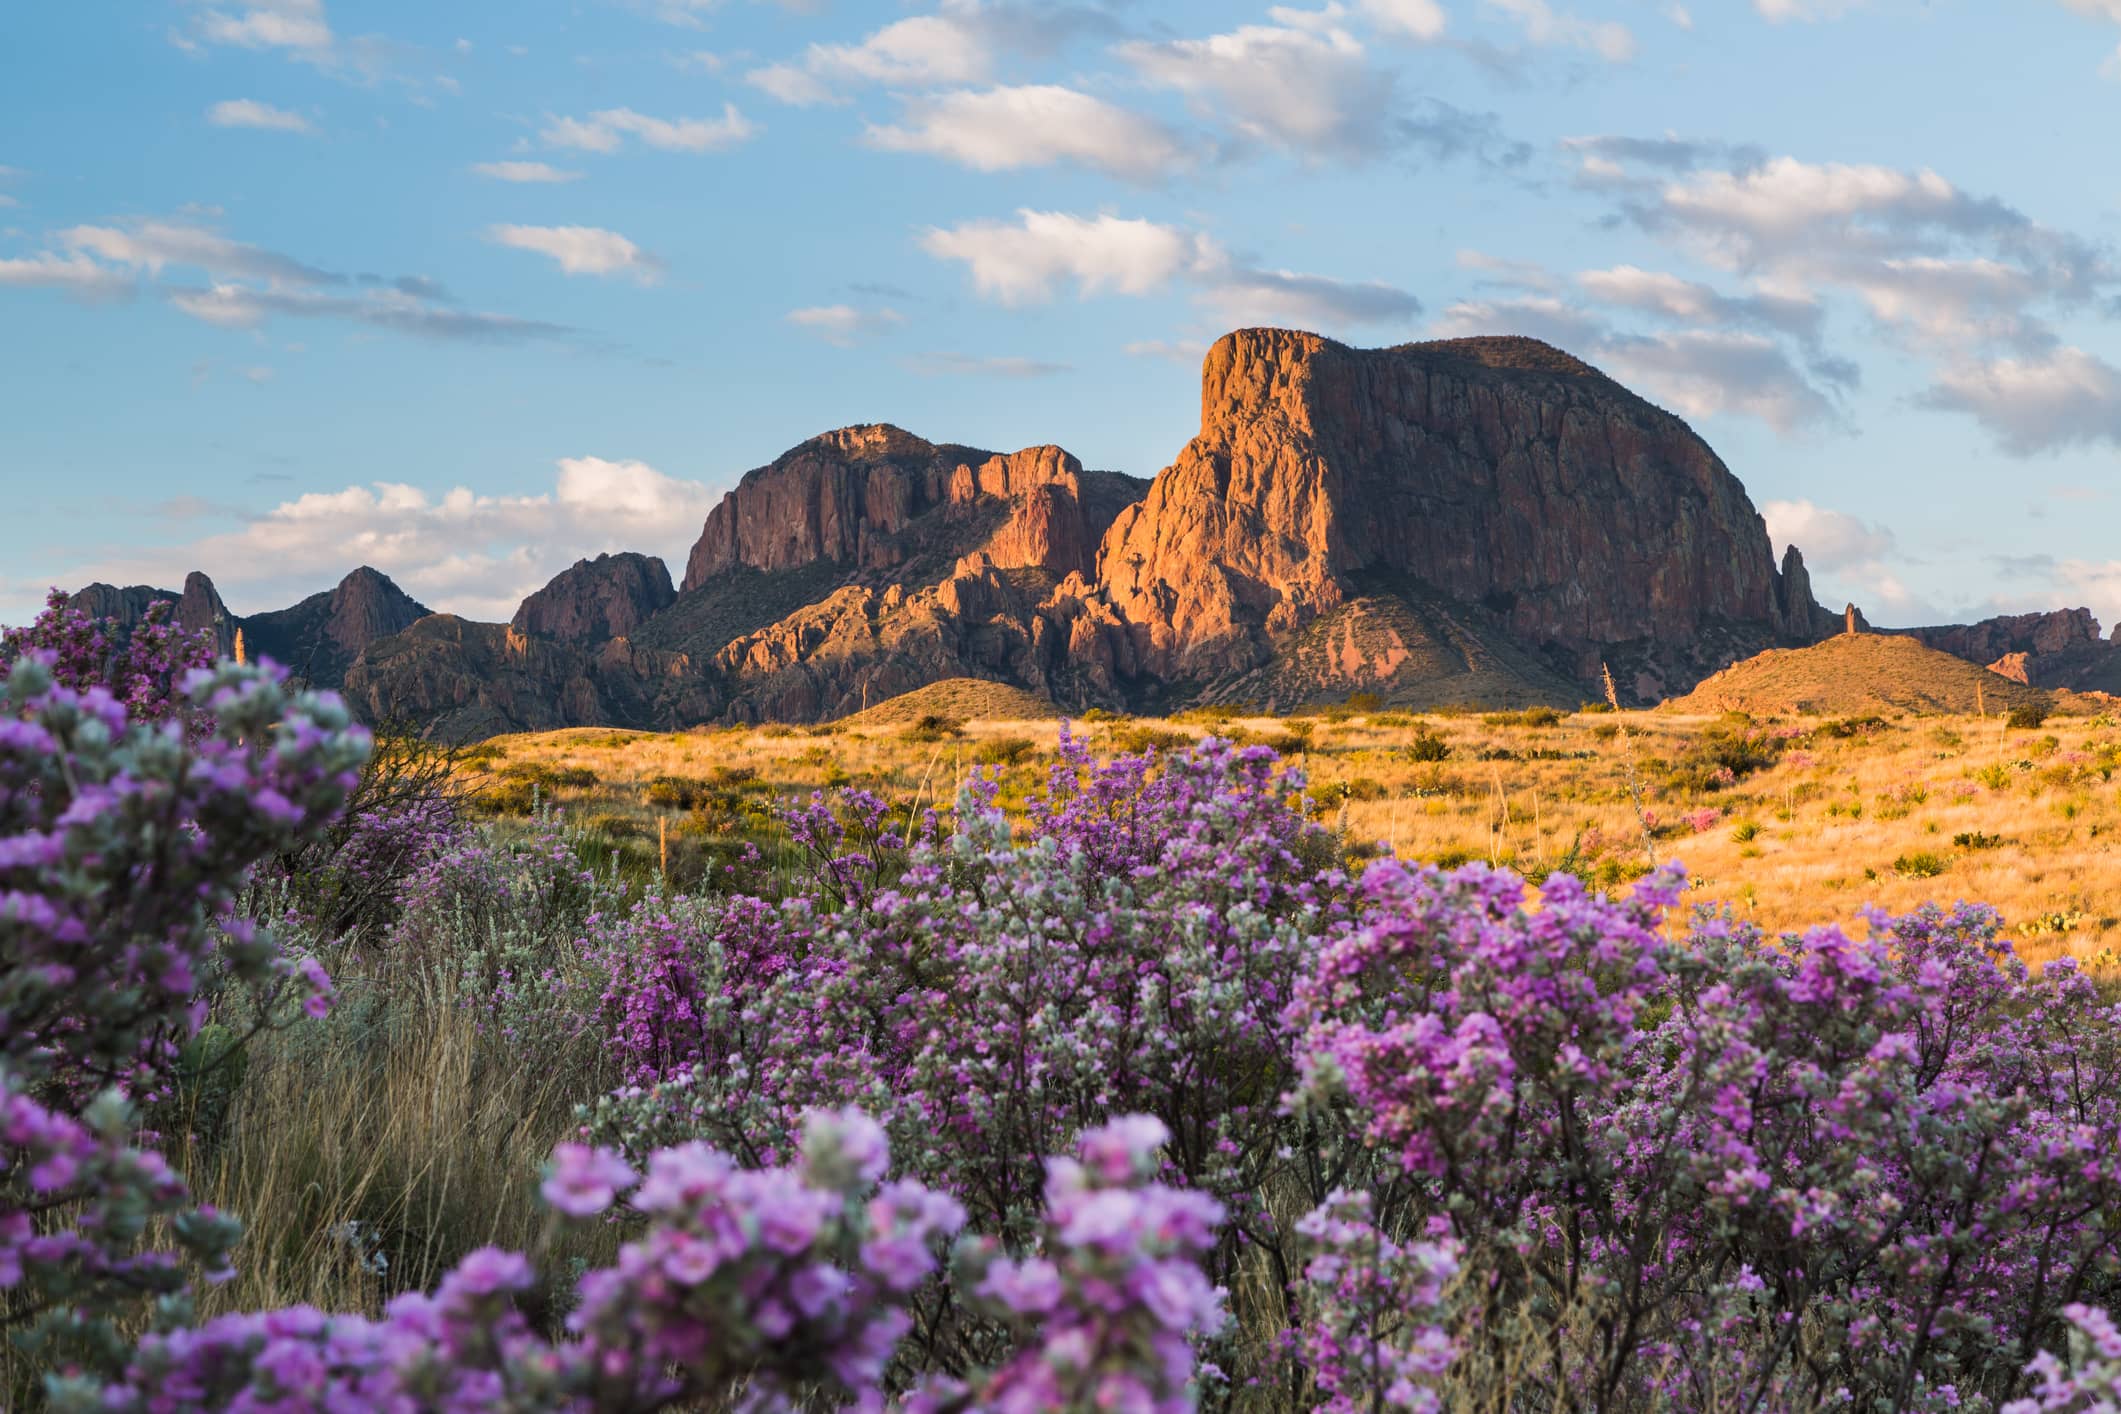 Sagebrush in Bloom at the Chisos in Texas